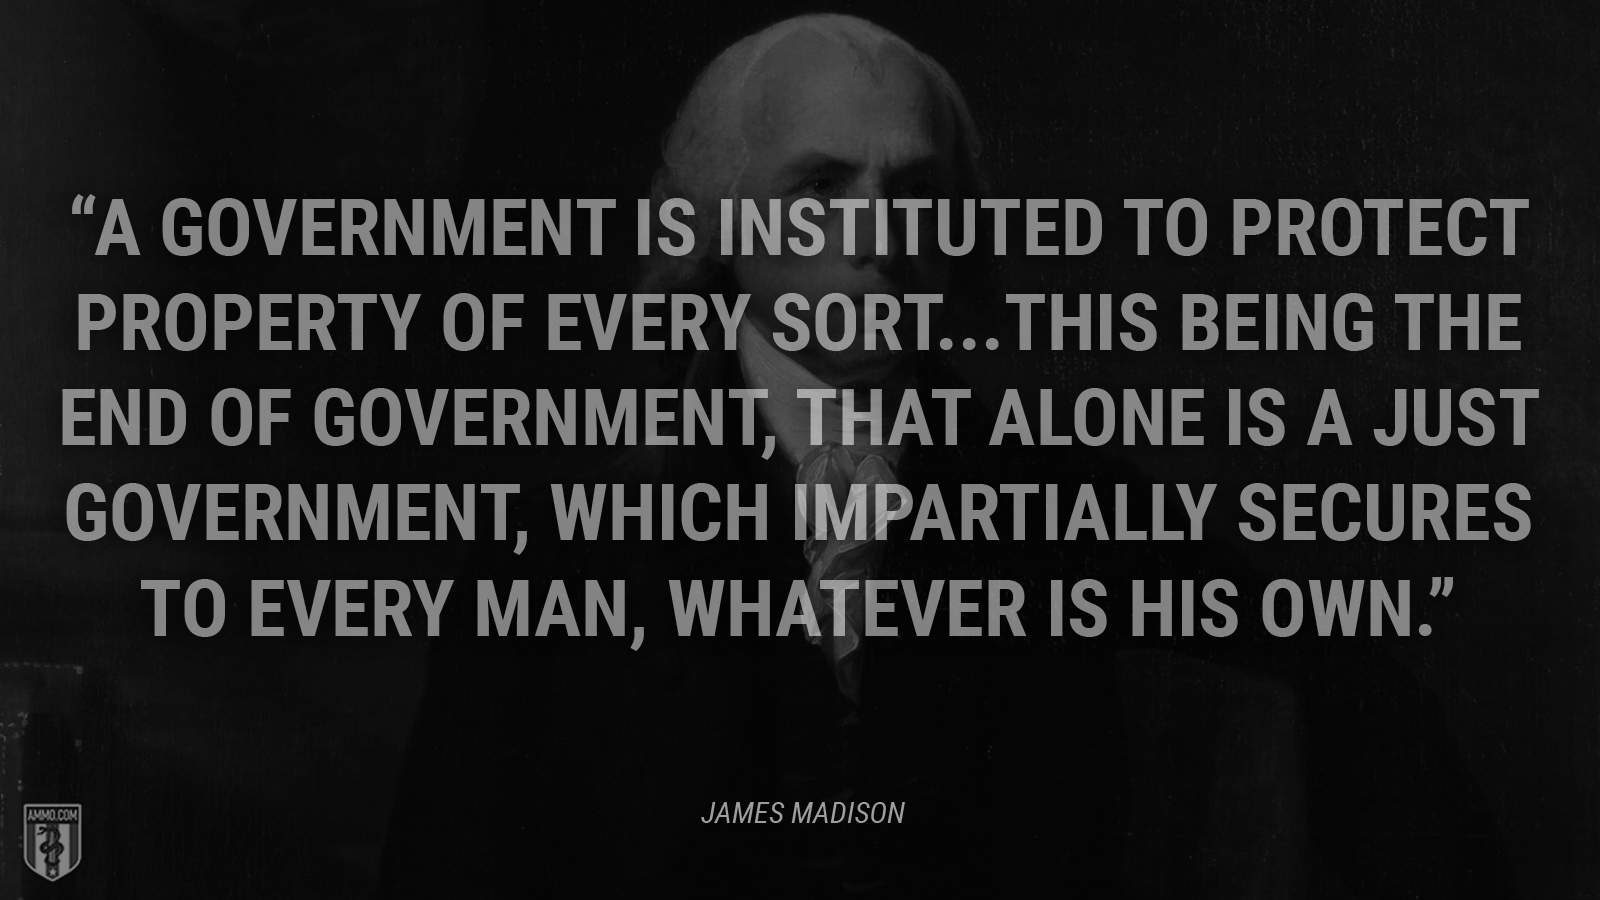 “A Government is instituted to protect property of every sort...This being the end of government, that alone is a just government, which impartially secures to every man, whatever is his own.” - James Madison